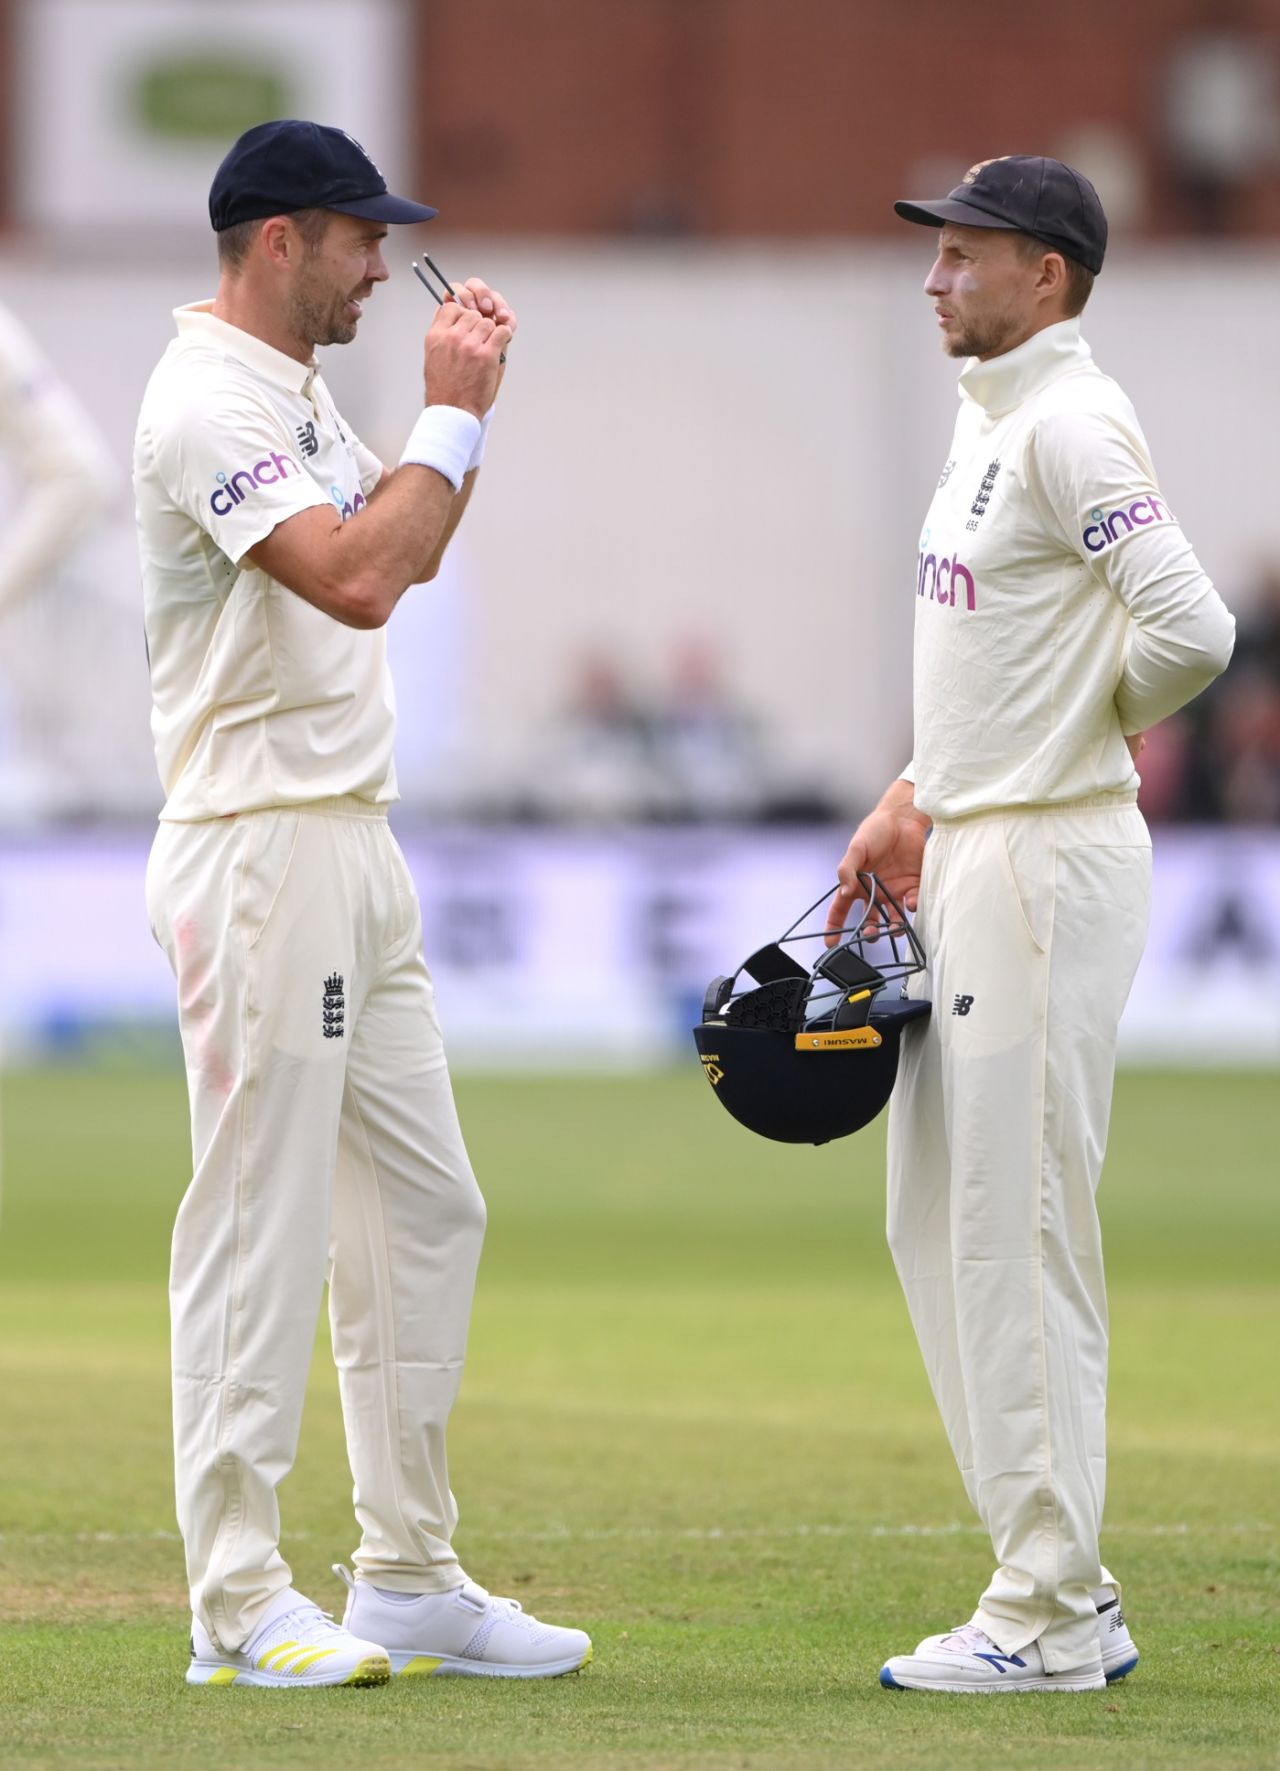 James Anderson has a chat with his captain Joe Root, England vs India, 1st Test, Nottingham, 2nd day, August 5, 2021